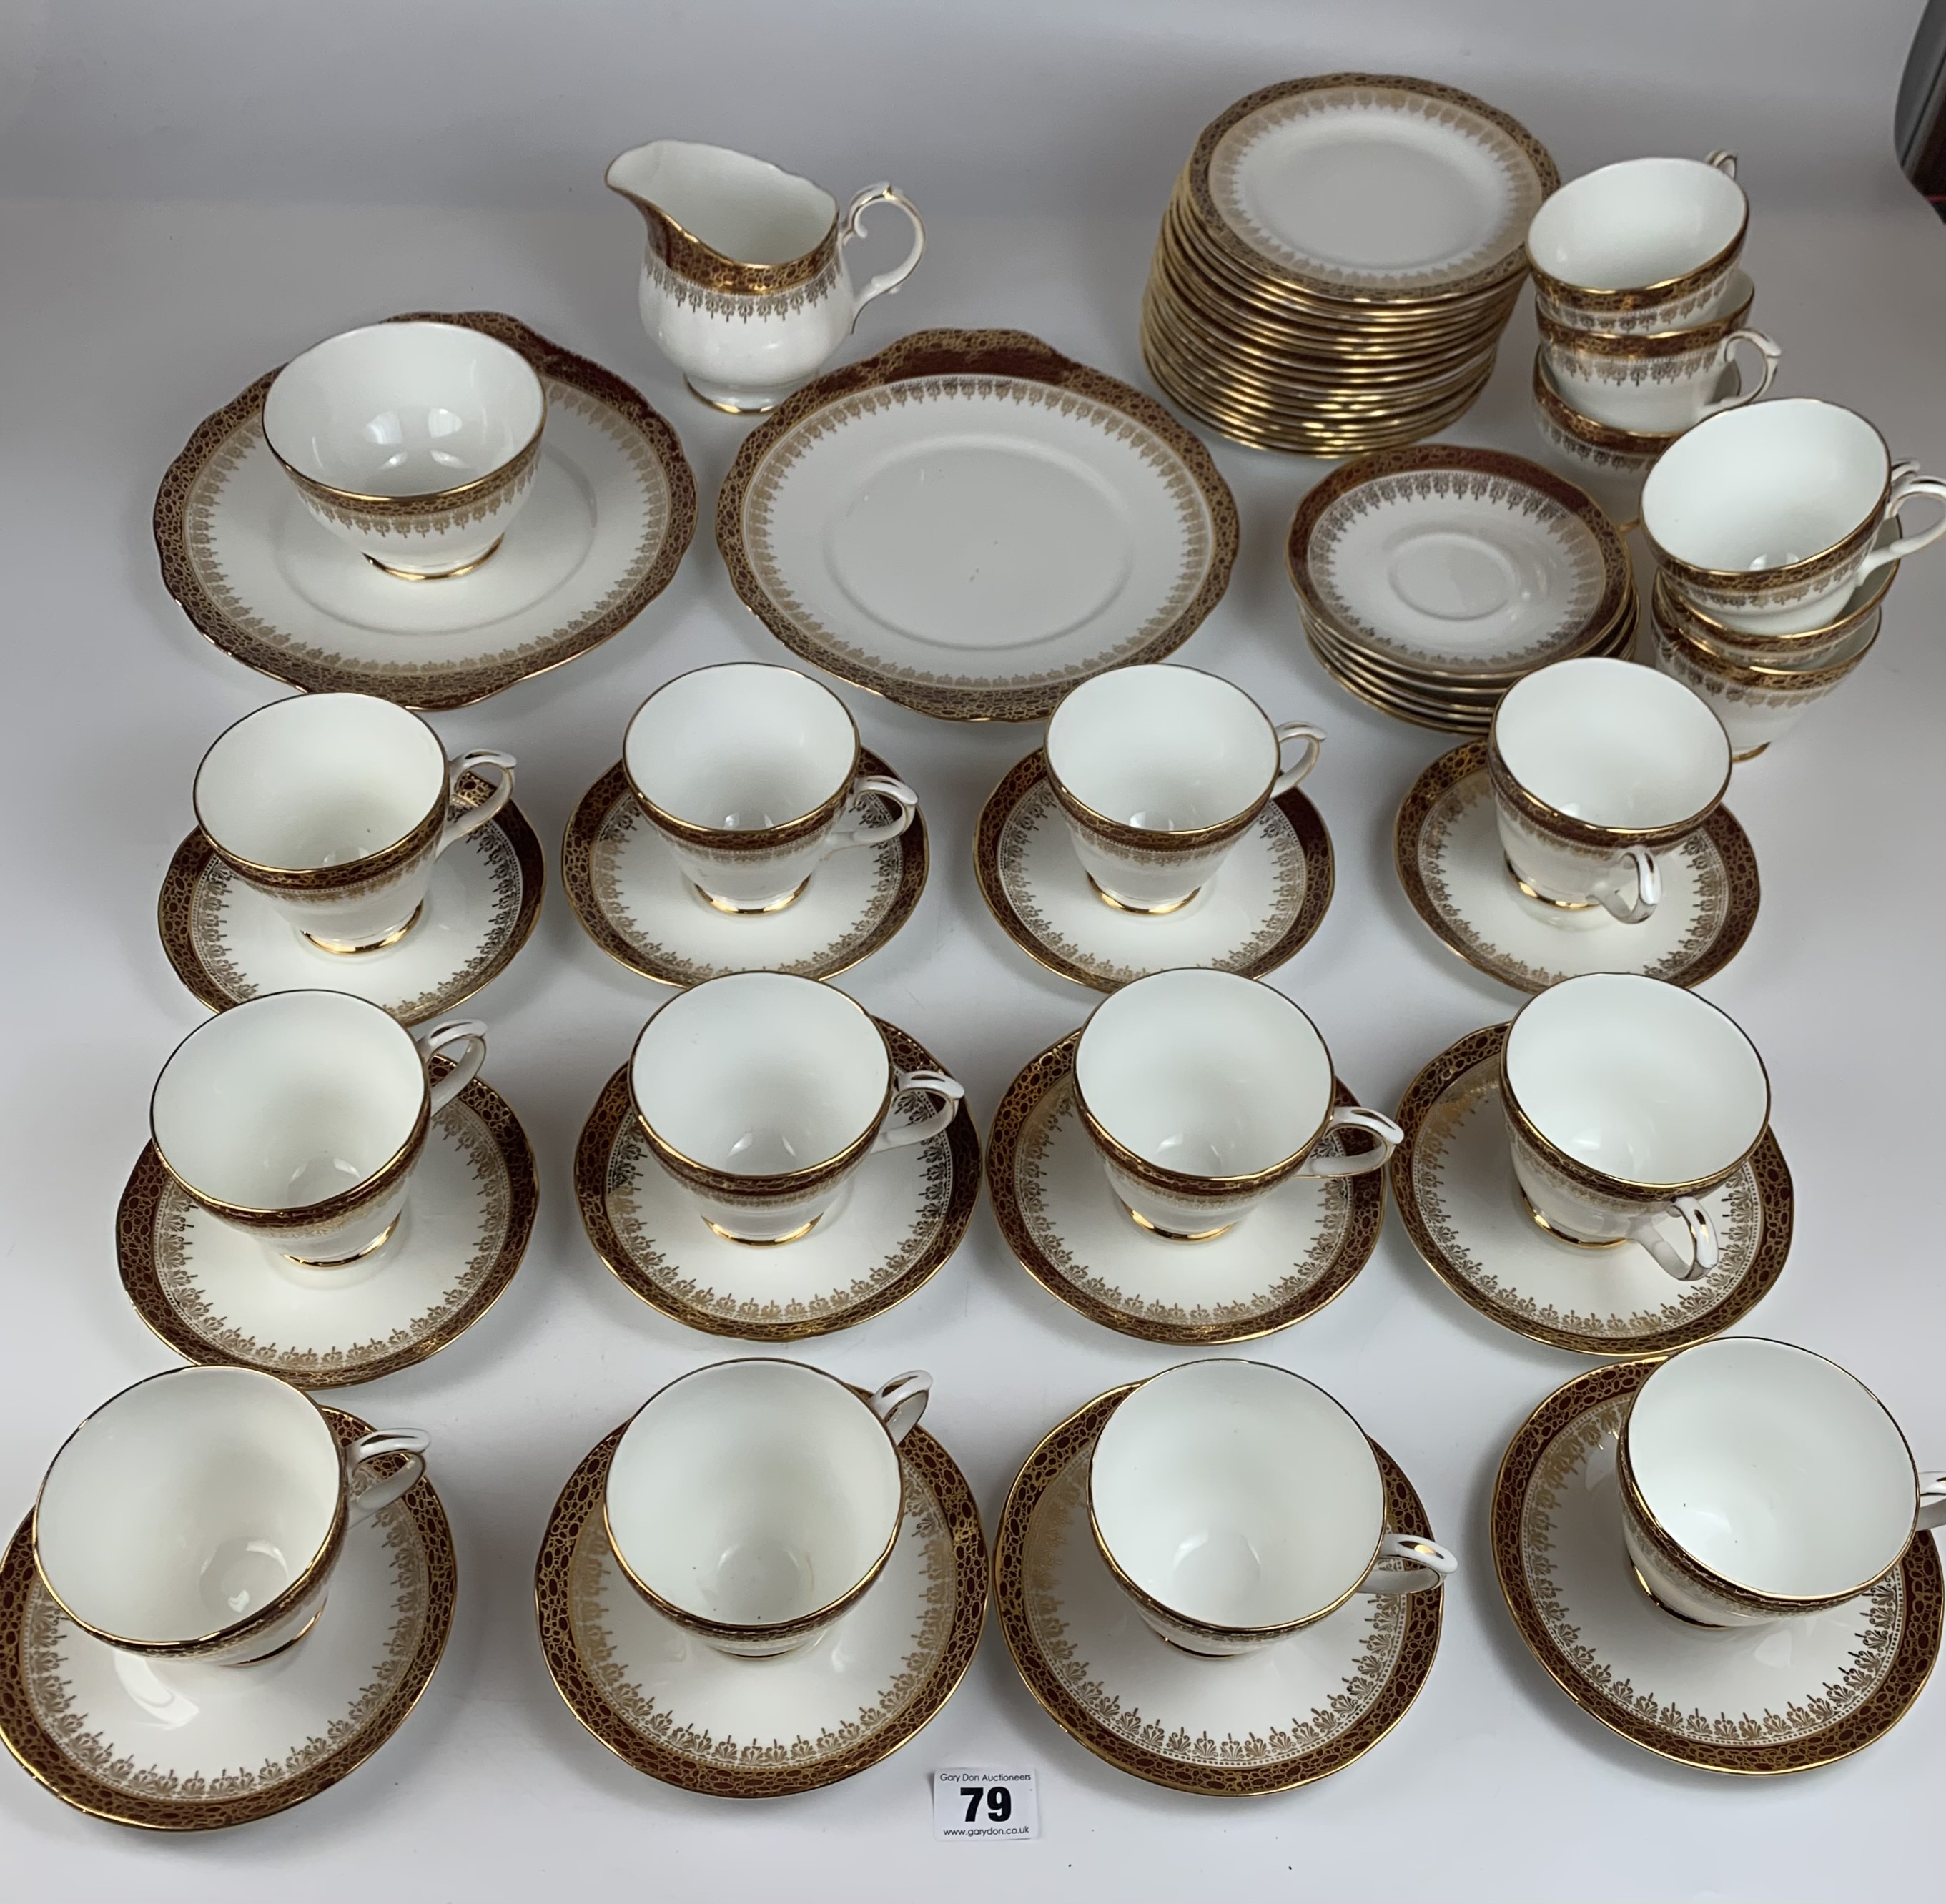 58 piece Duchess bone china ‘Winchester’ tea service to include 18 cups, 18 saucers, 18 side plates,